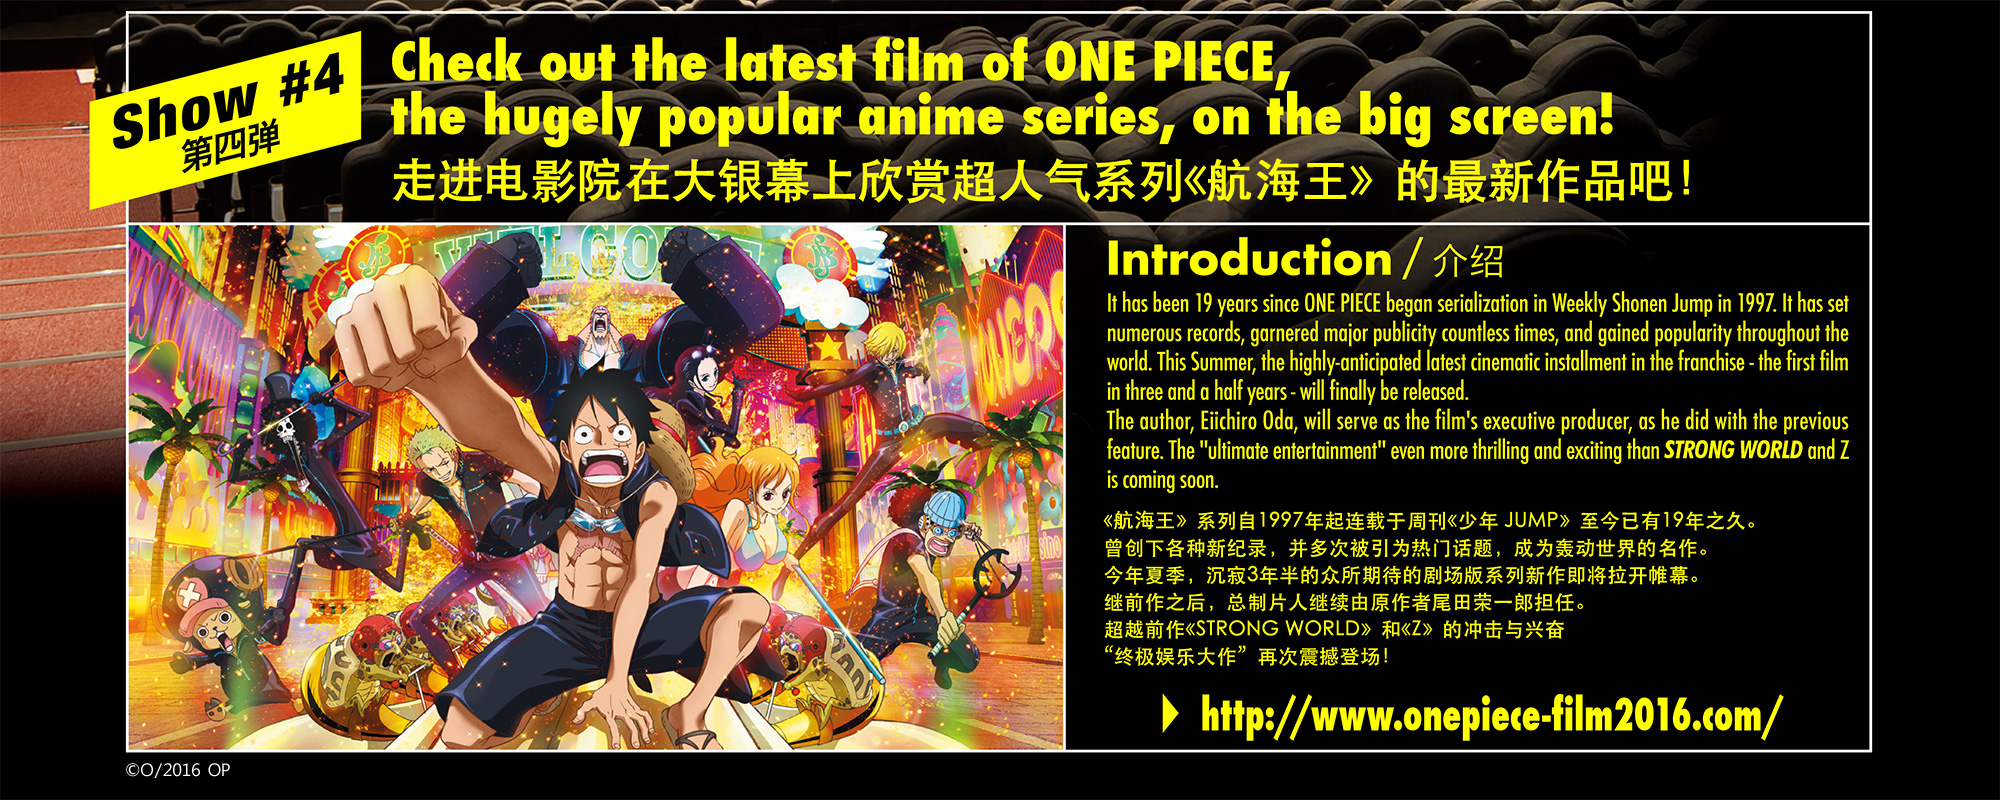 Check out the latest film of ONE PIECE,  the hugely popular anime series, on the big screen!